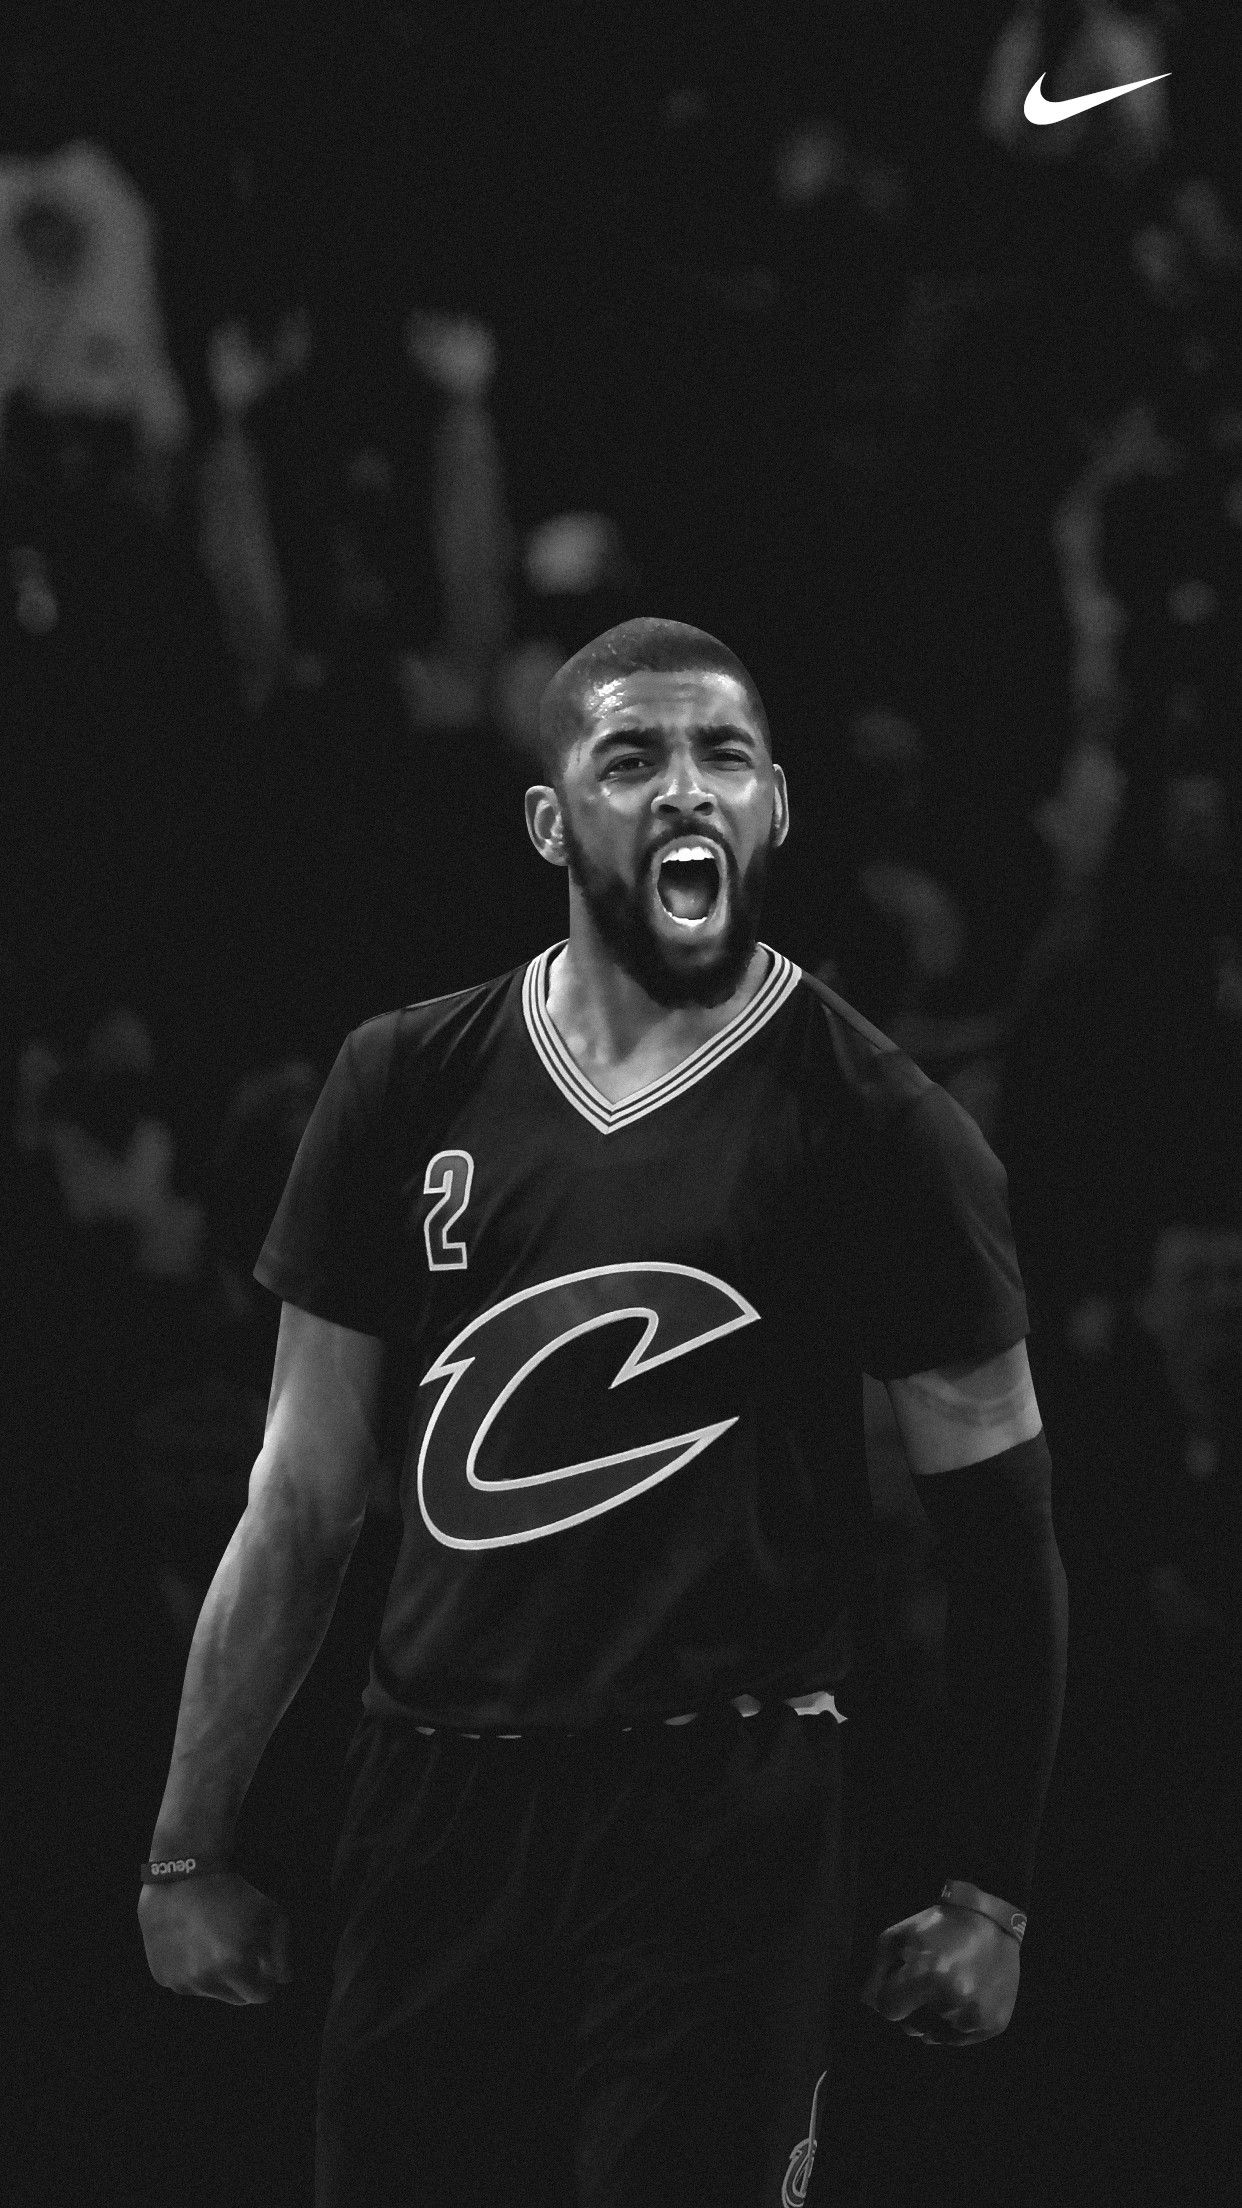 10 Latest Kyrie Irving Iphone Wallpaper Hd FULL HD 1920×1080 For PC Background